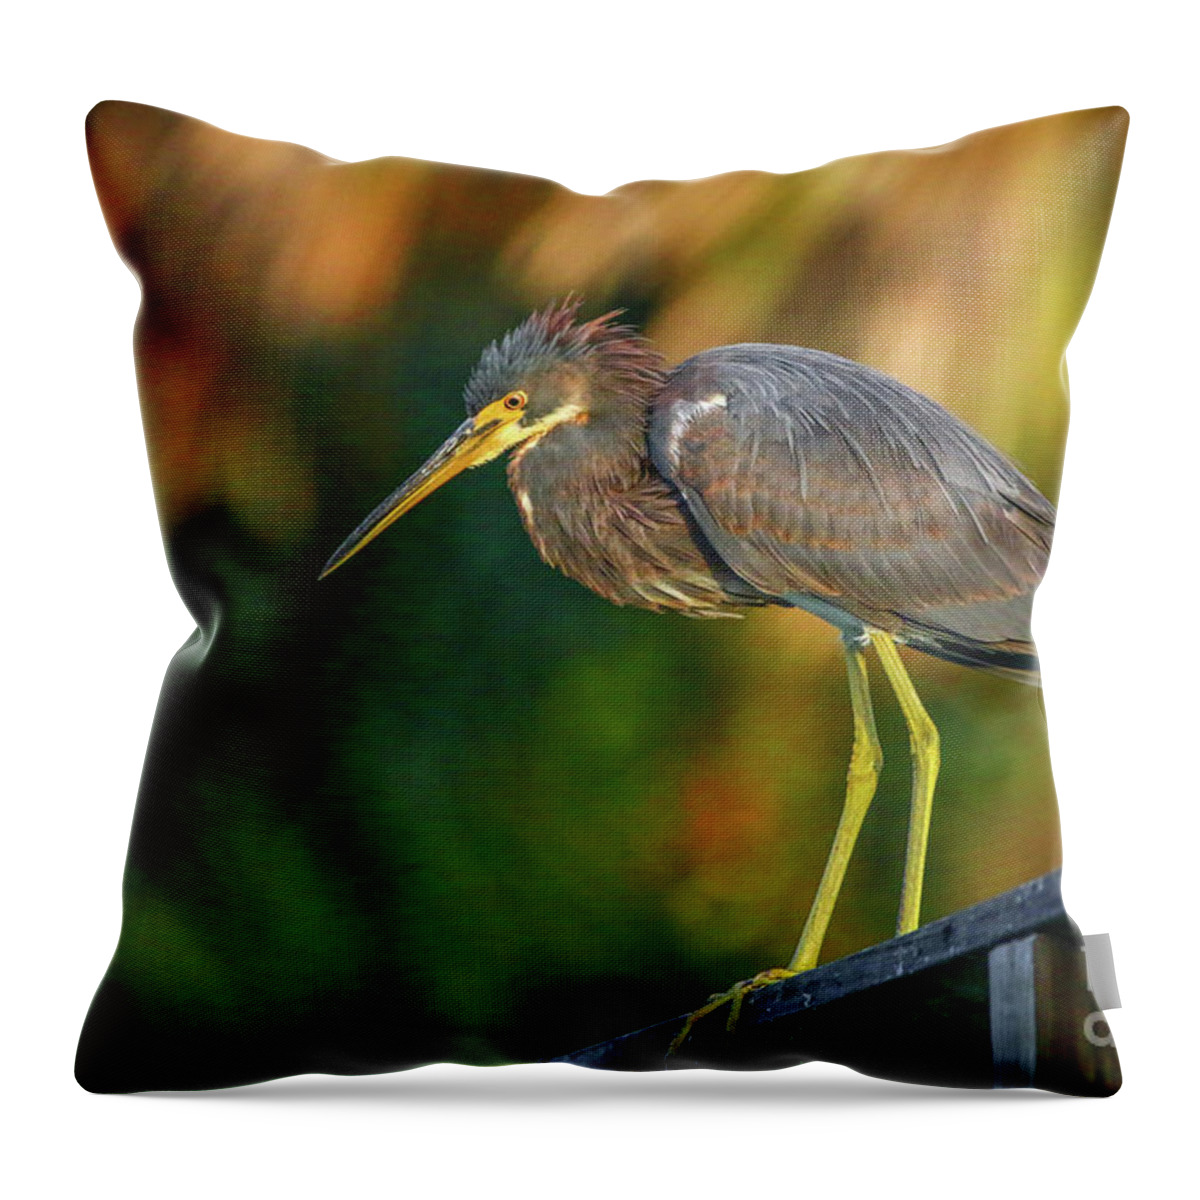 Tricolor Throw Pillow featuring the photograph Tricolor Pose by Tom Claud